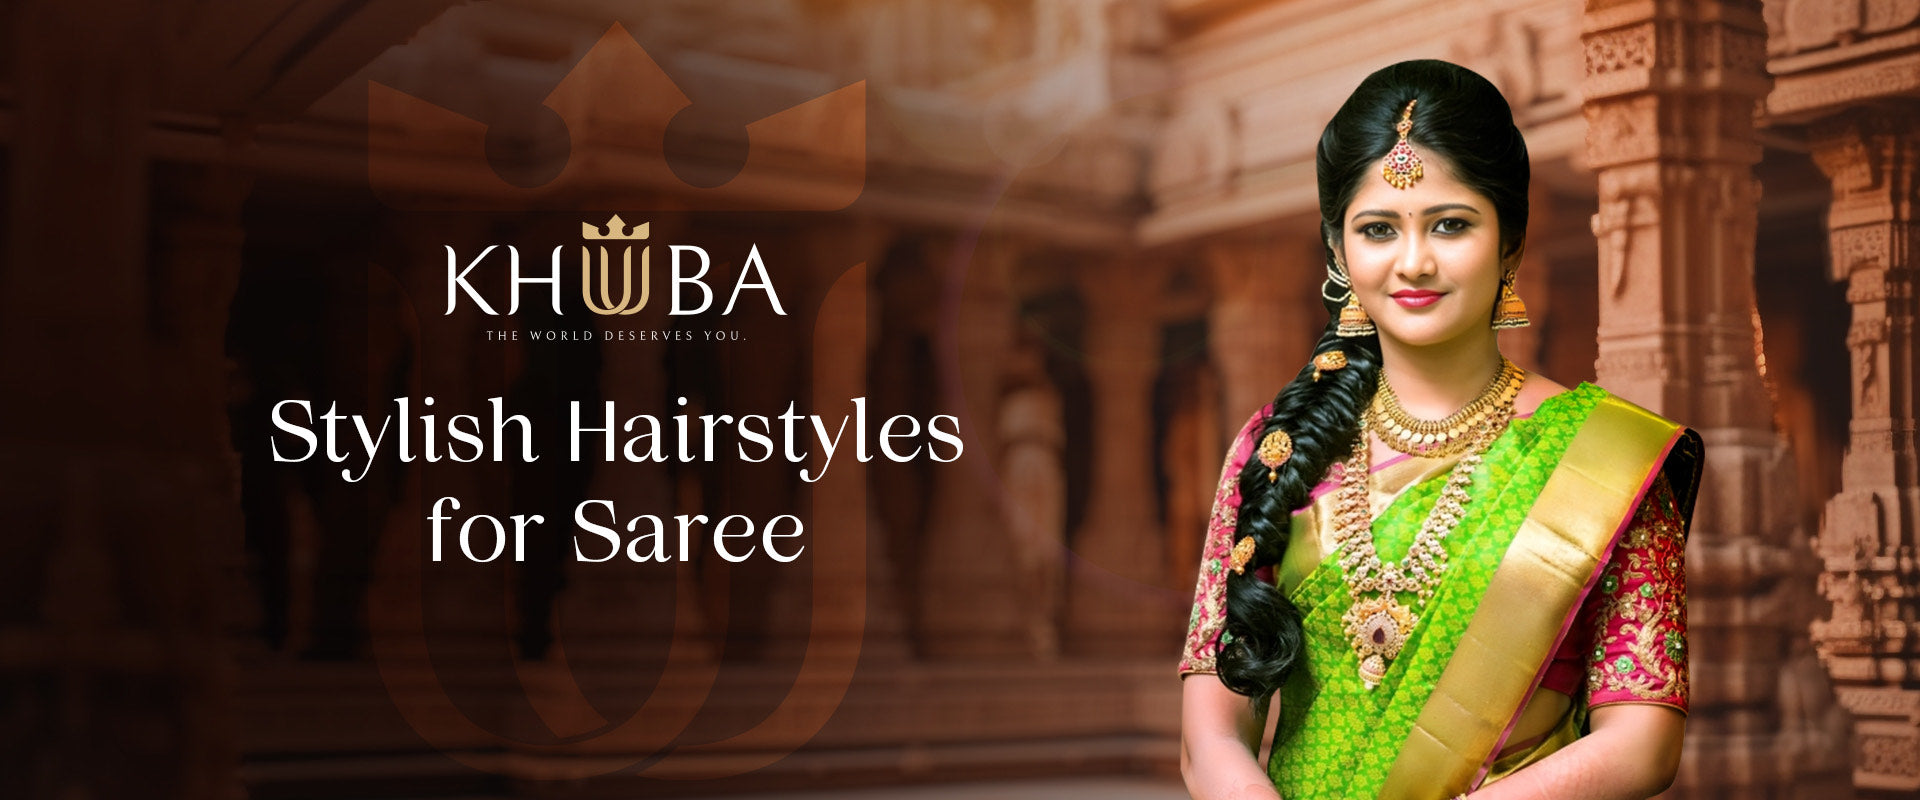 40+ Stylish Hairstyles for Saree That Make You Stand Out Unique